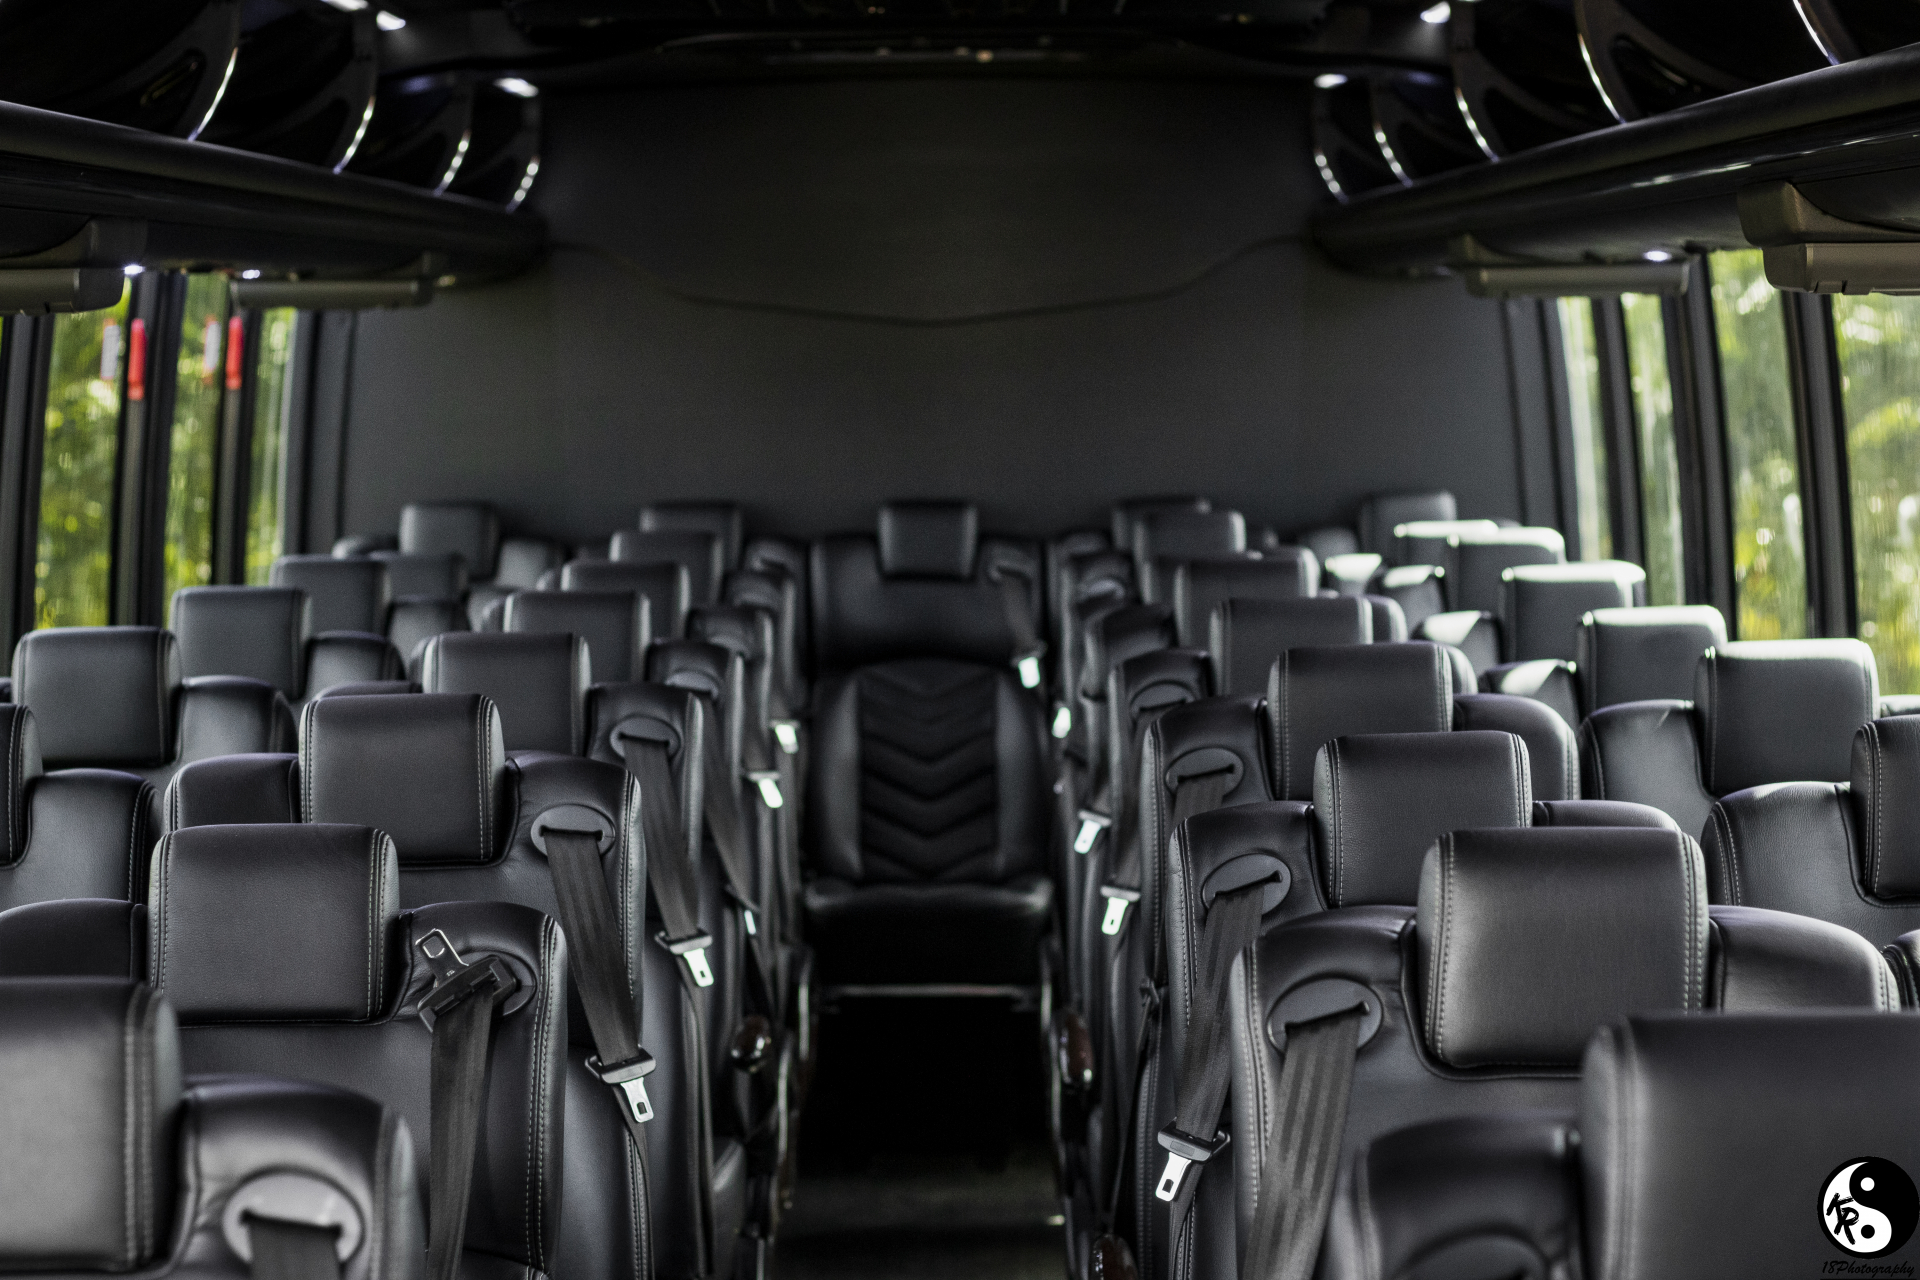 2018 Grech Freightliner(40 passengers)
Party Limo Bus /
Aventura, FL

 / Hourly $0.00
